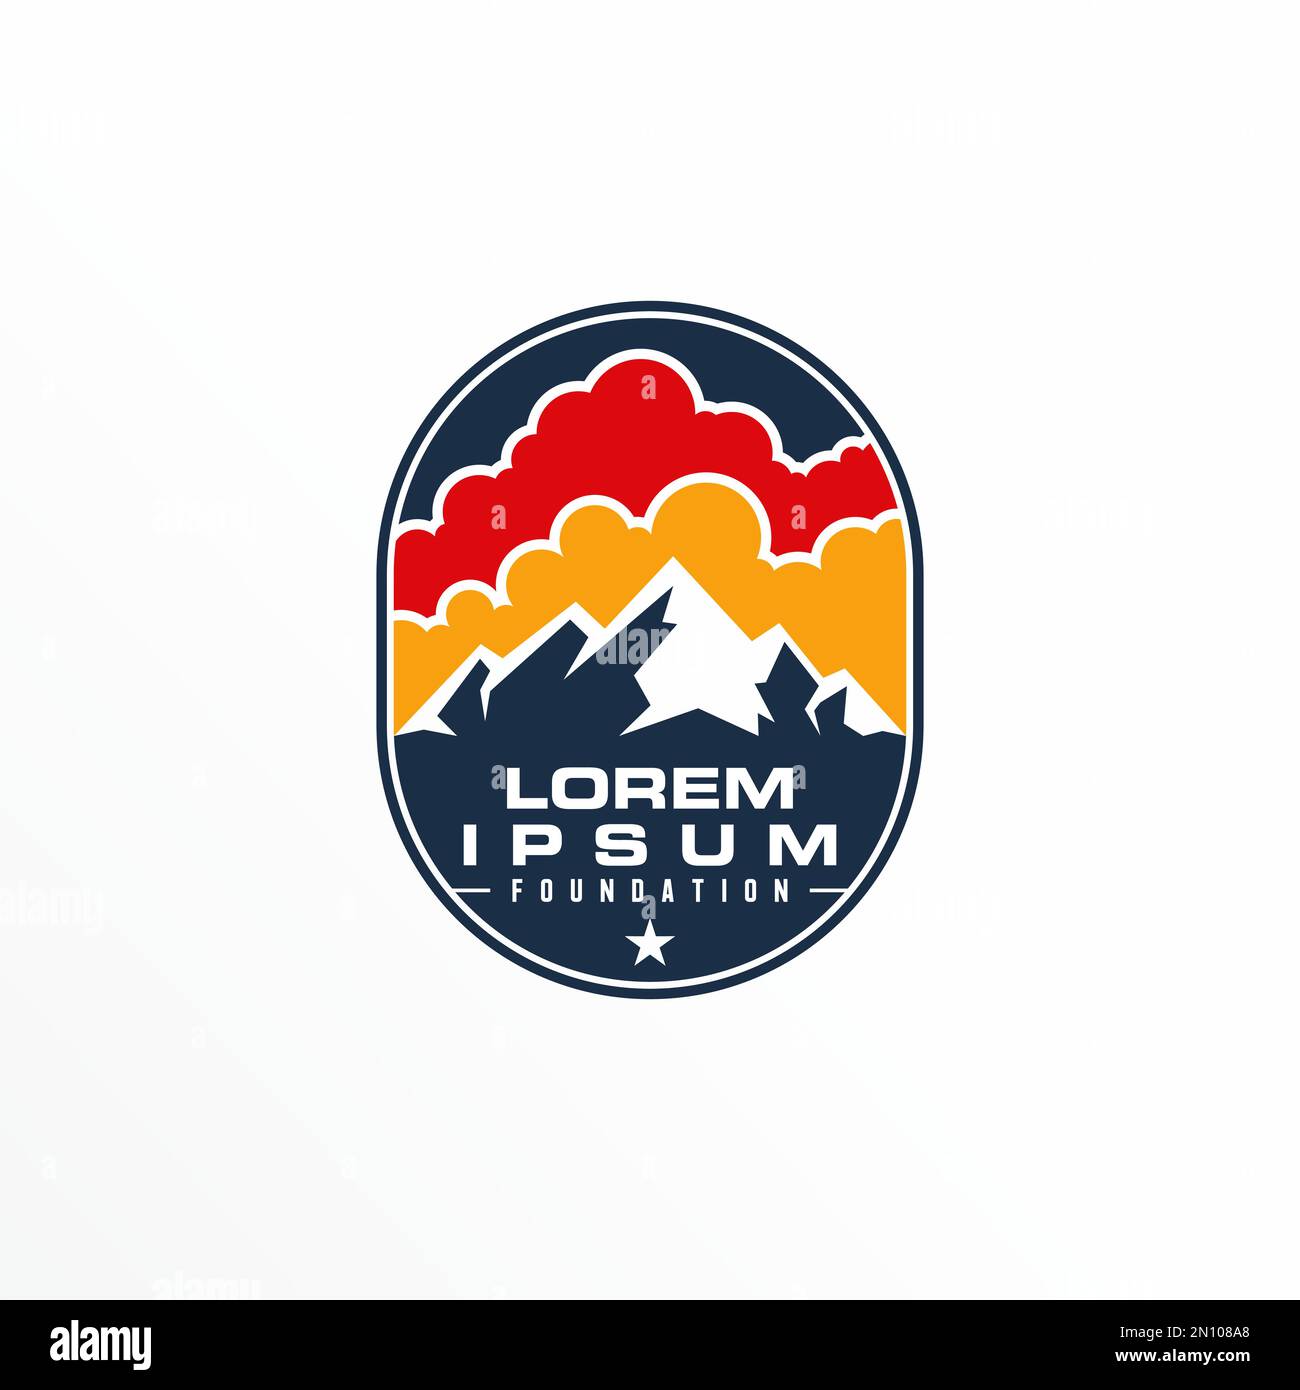 Iceberg or mountain with could in Ellipse Square emblem image graphic icon logo design abstract concept vector stock symbol related to adventure. Stock Vector